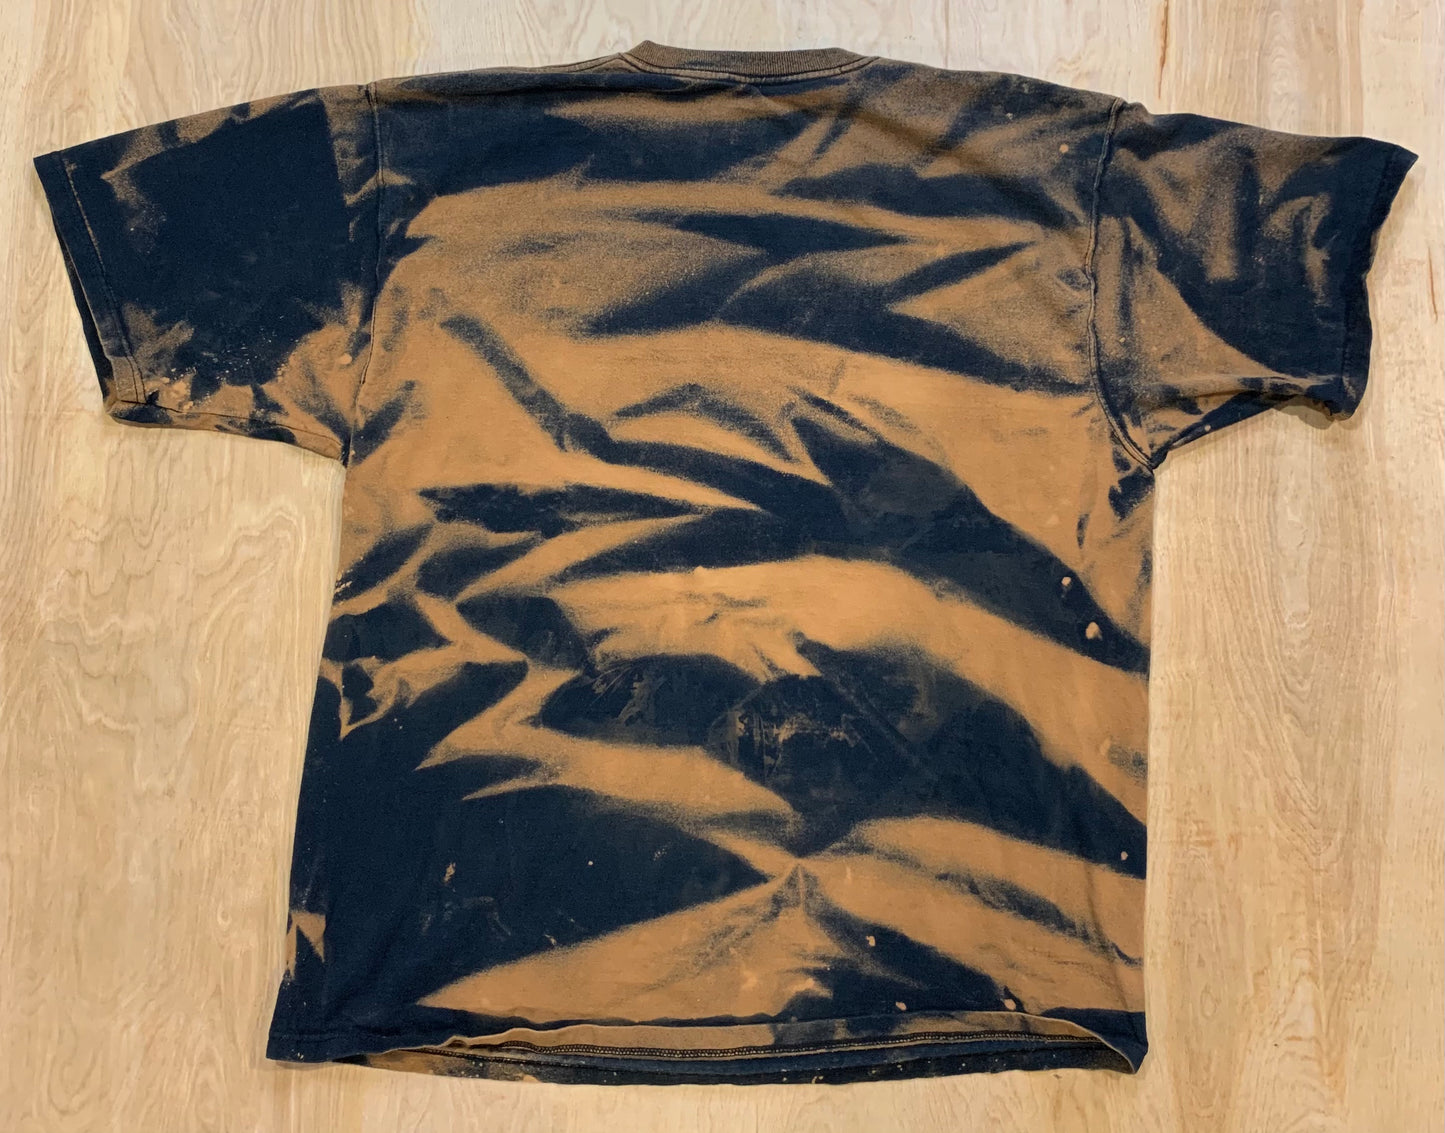 Native American "Homeland Security" bleached T-shirt